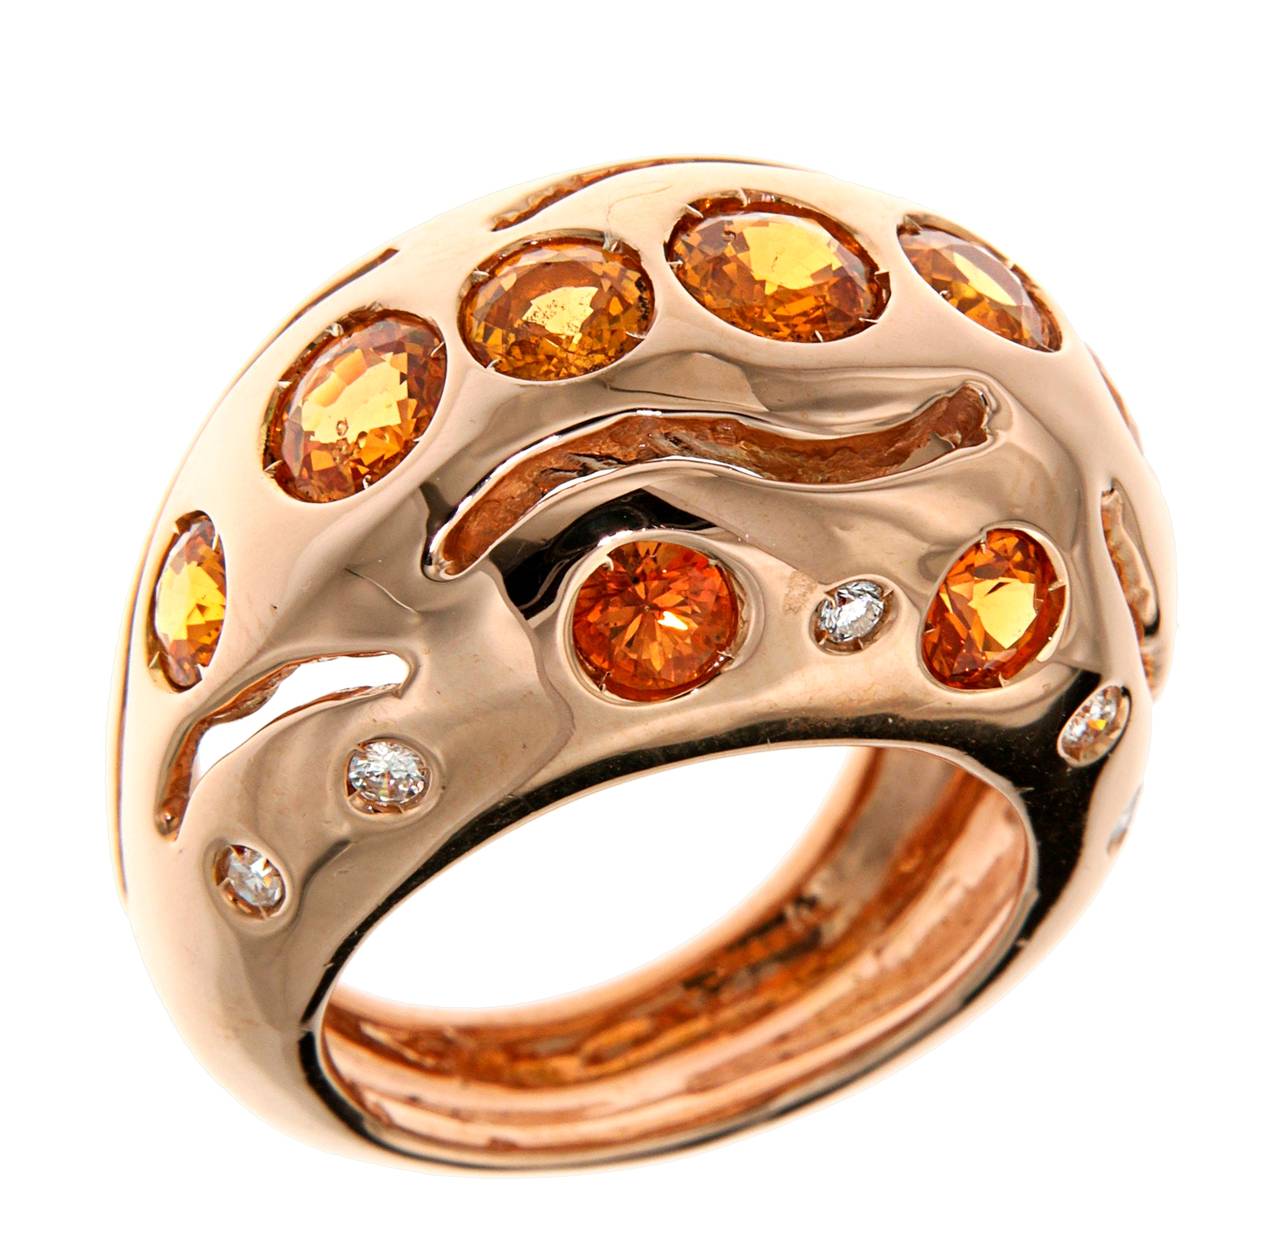 Rose gold 18k ring with orange sapphires 3.90 ctw and diamonds 0.20 ctw 
Finger Size 5 1/2, can be resized. Handcraftd in Italy by Botta Gioielli.
It  is stamped with the Italian Mark 750 - 716MI

Handcrafted in: 18k rose gold.
10 brilliant cut